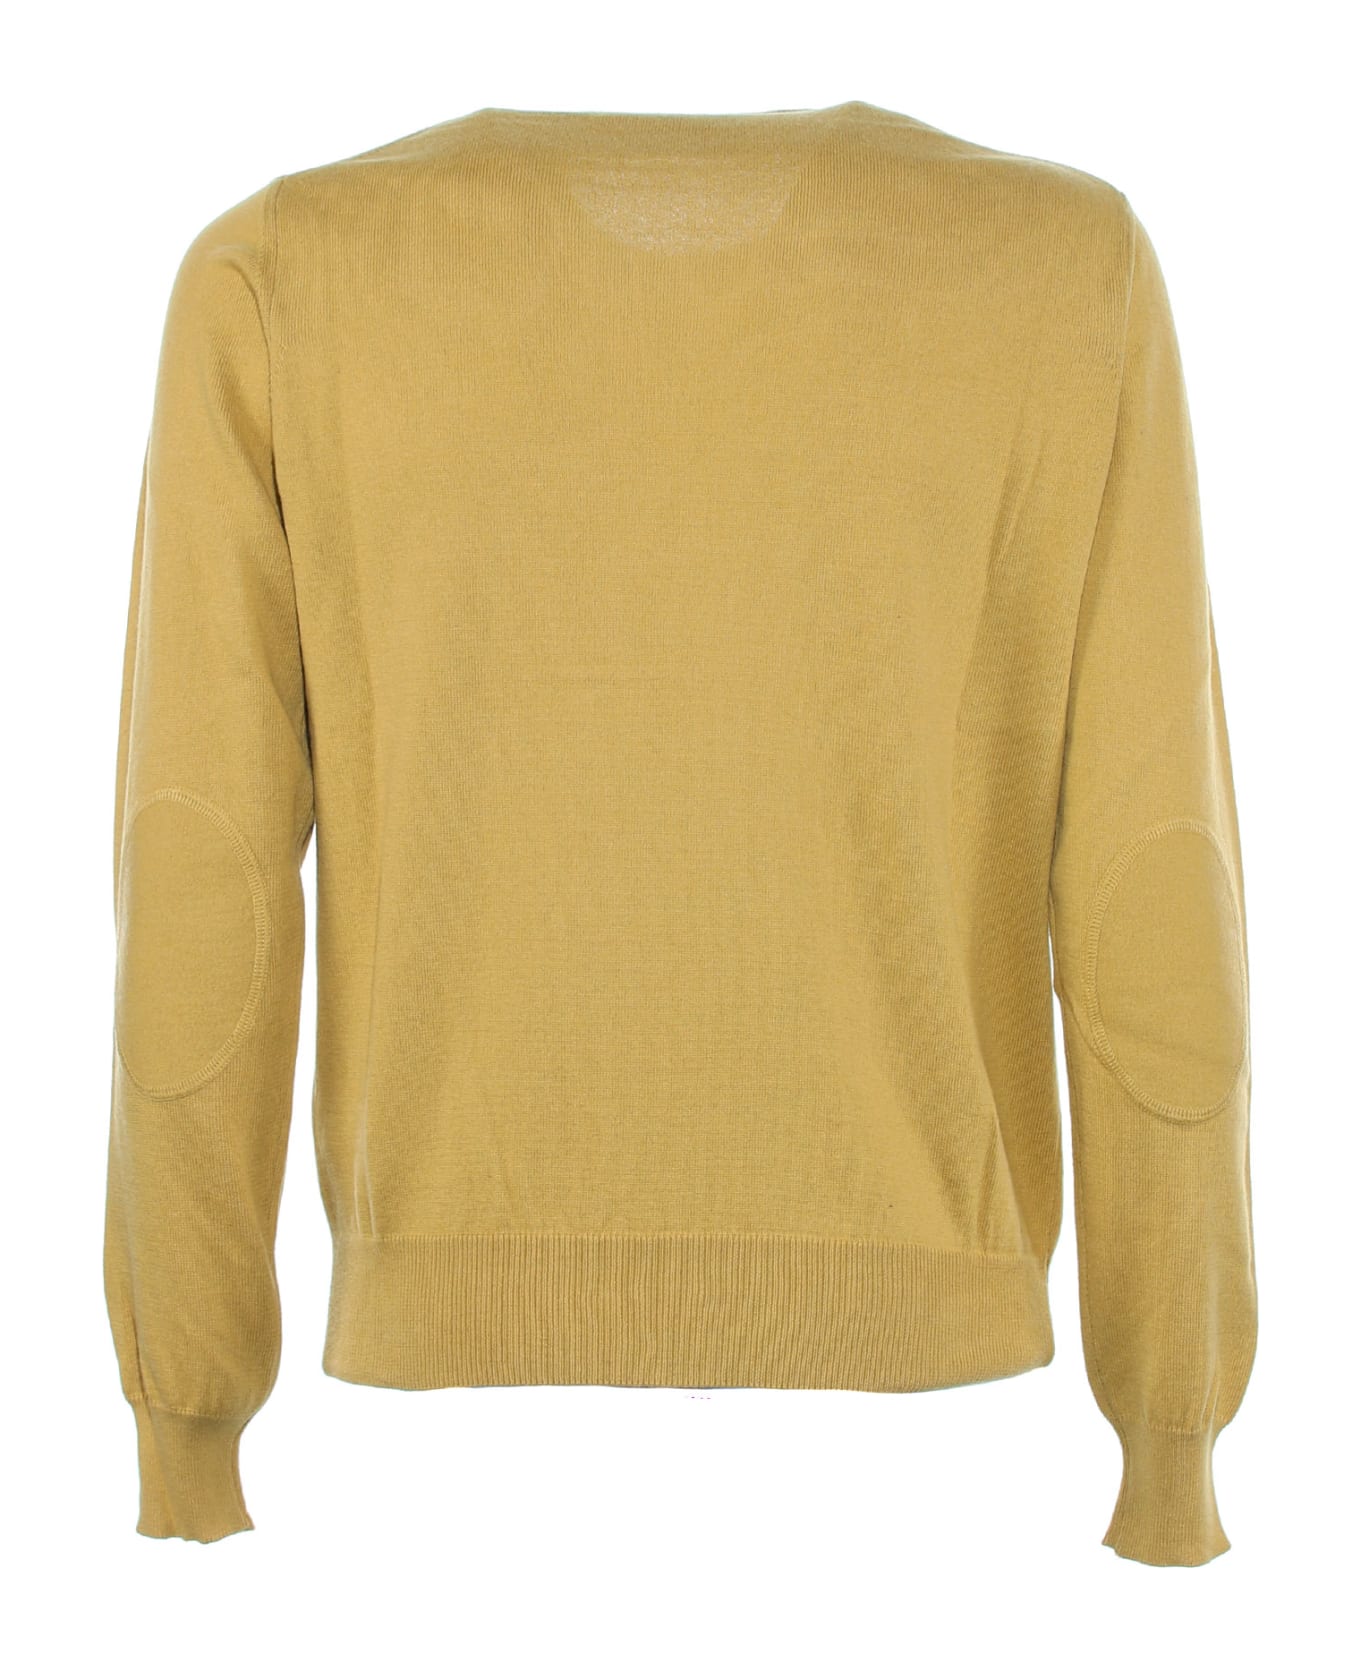 Peuterey Sweater With Elbow Patches - OCRA ニットウェア